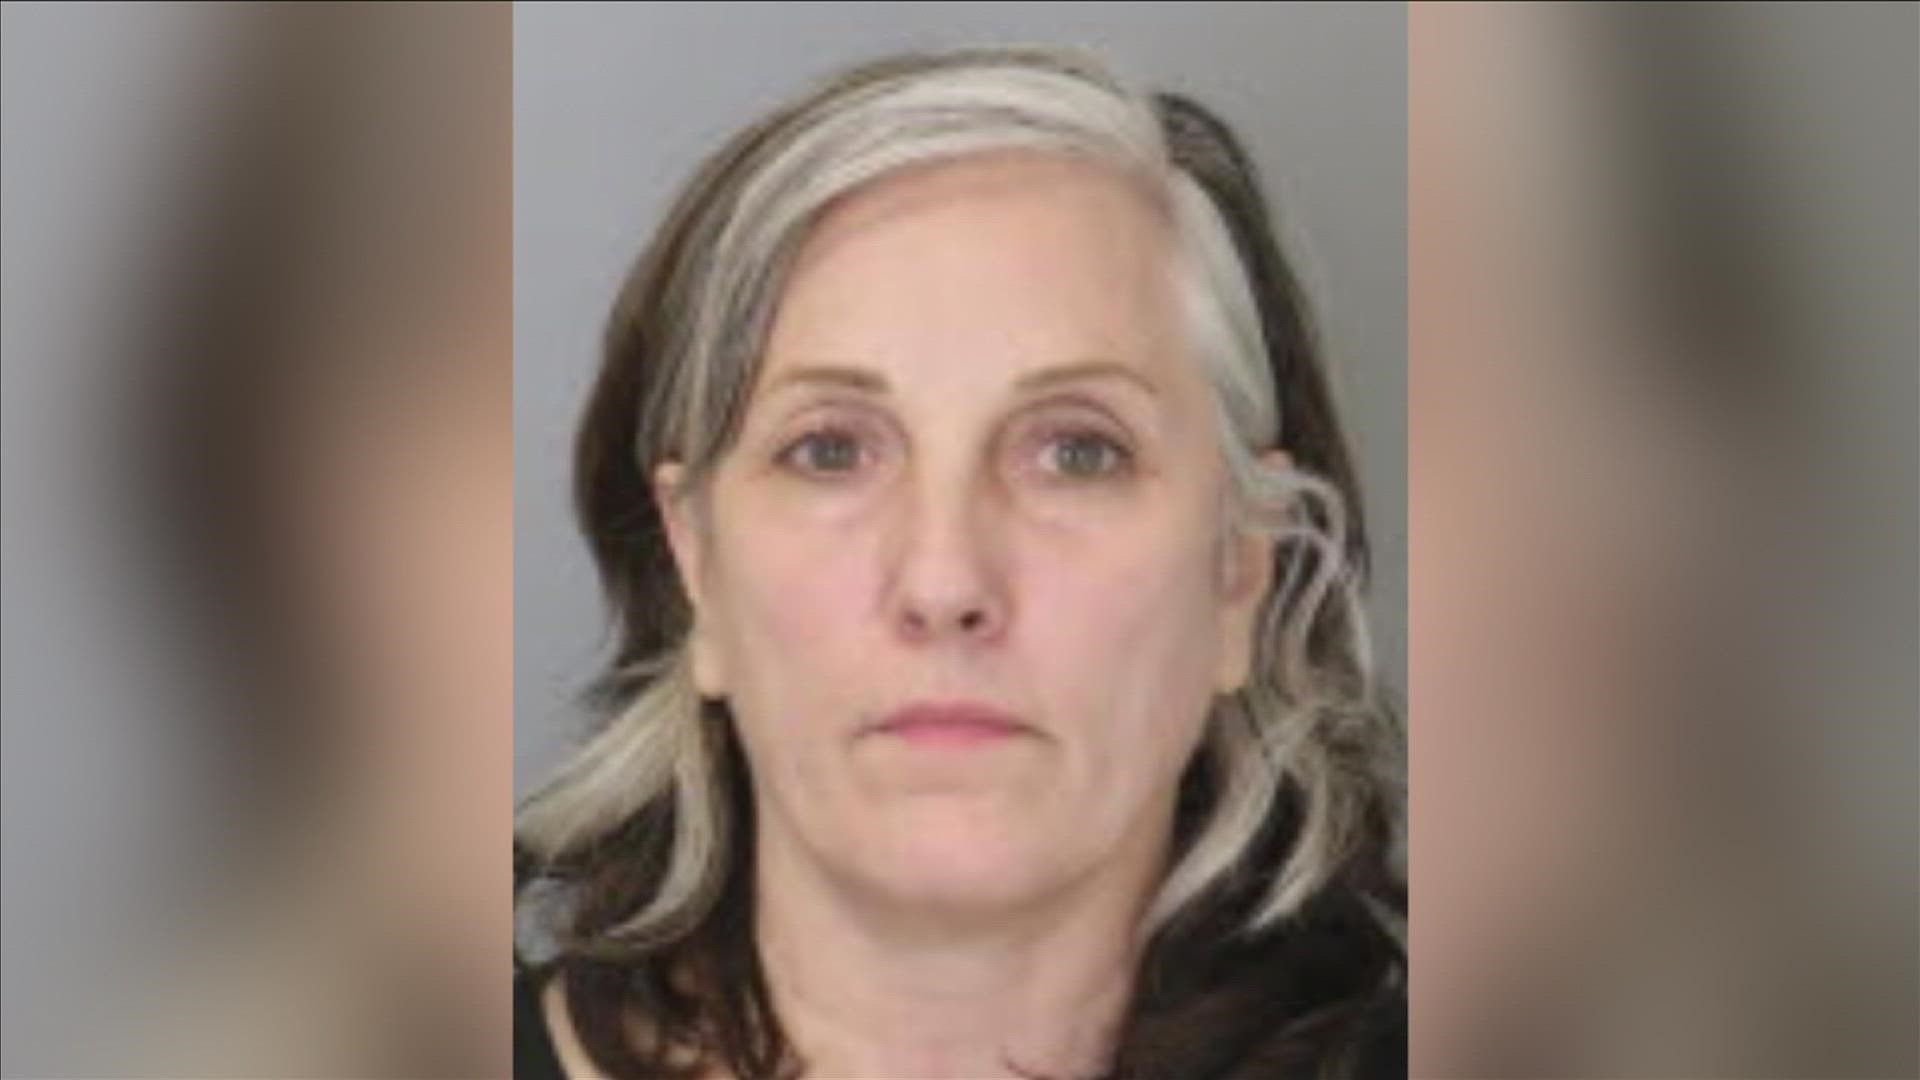 A 54-year-old woman, whose last known address is in Seattle, drove a rental car full of drugs and cash when she ran out of gas on the Memphis bridge.